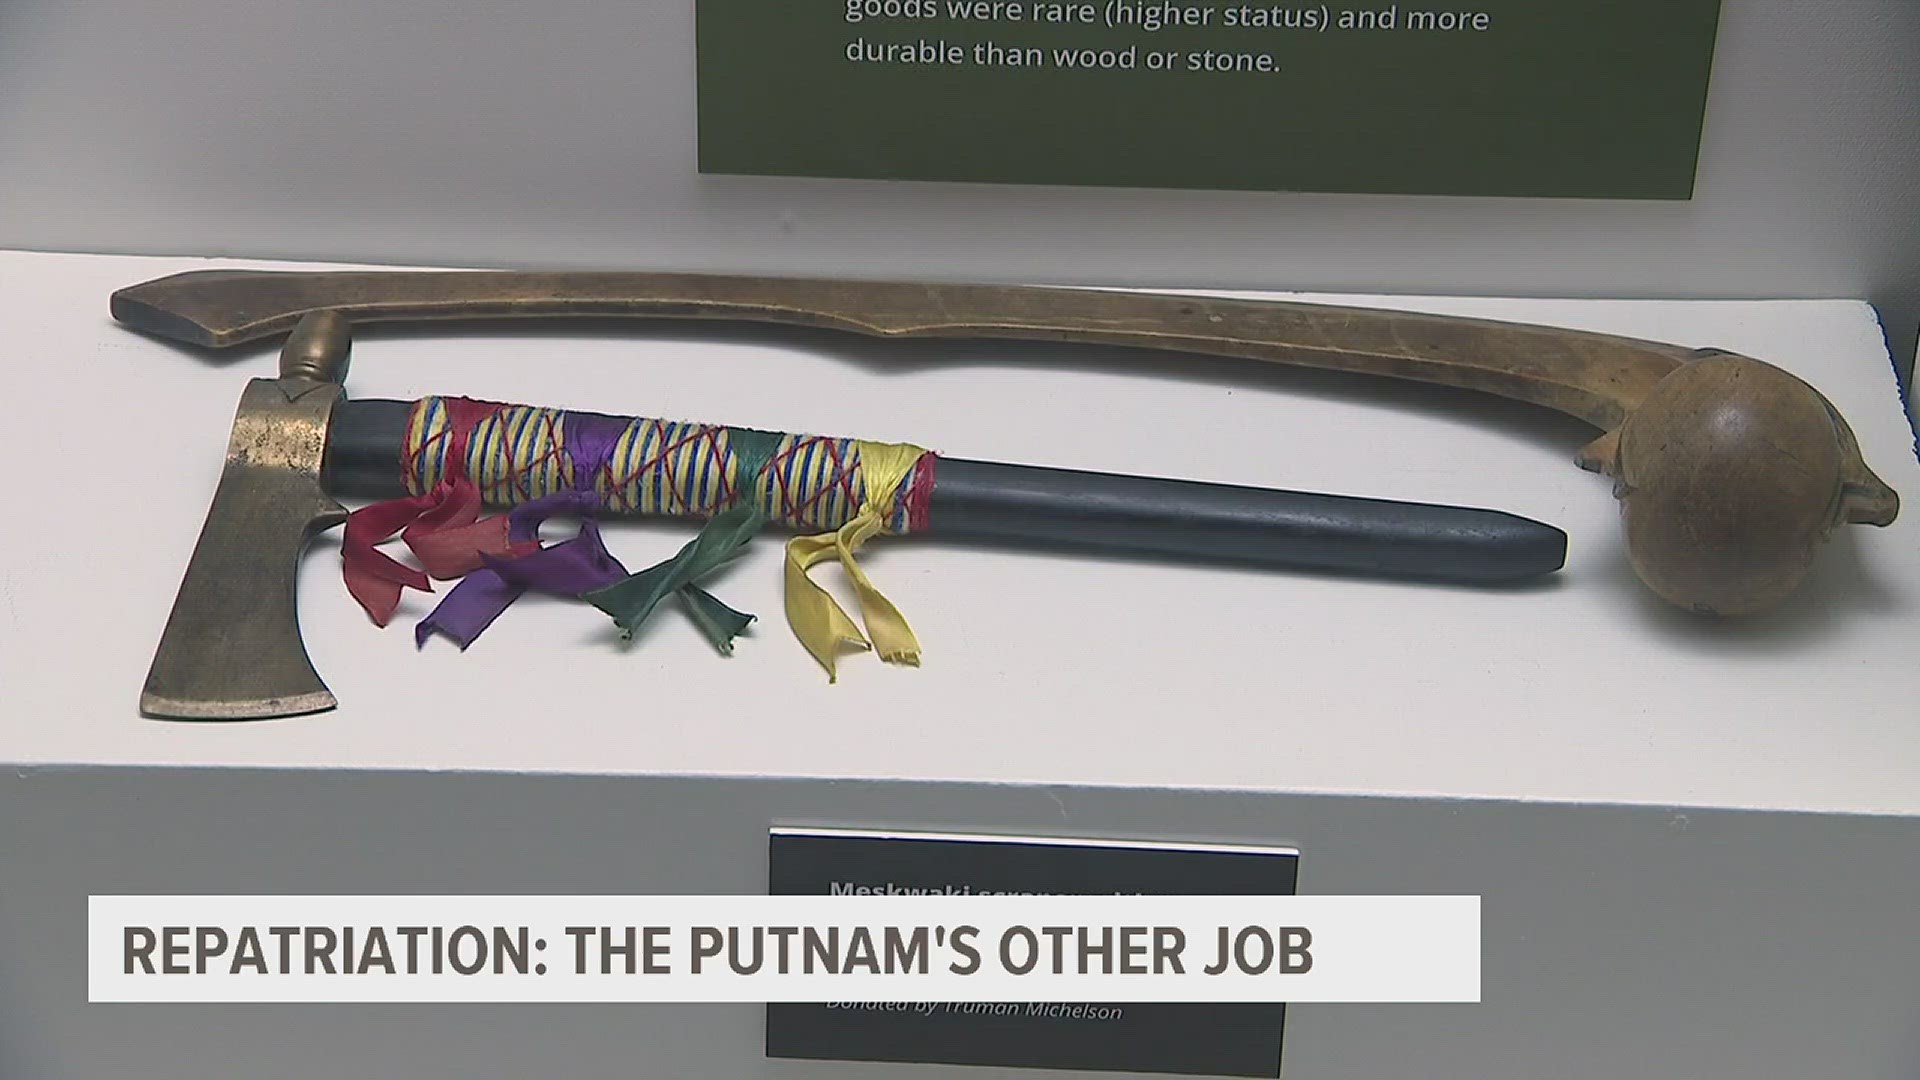 The Putnam Museum says since 2000 it's repatriated remains to about half a dozen tribes.